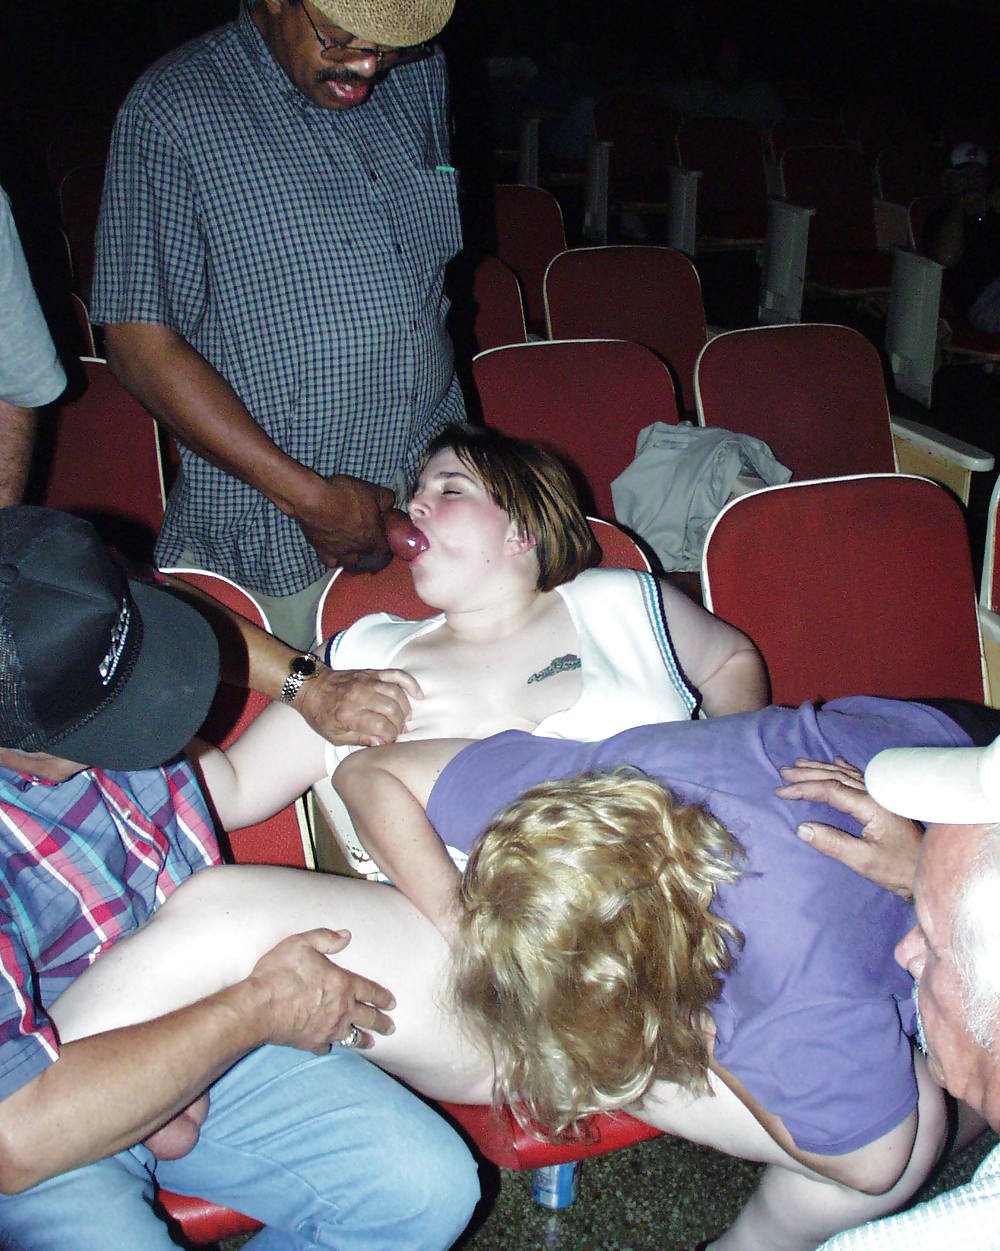 Kaylee at adult theater #19248573